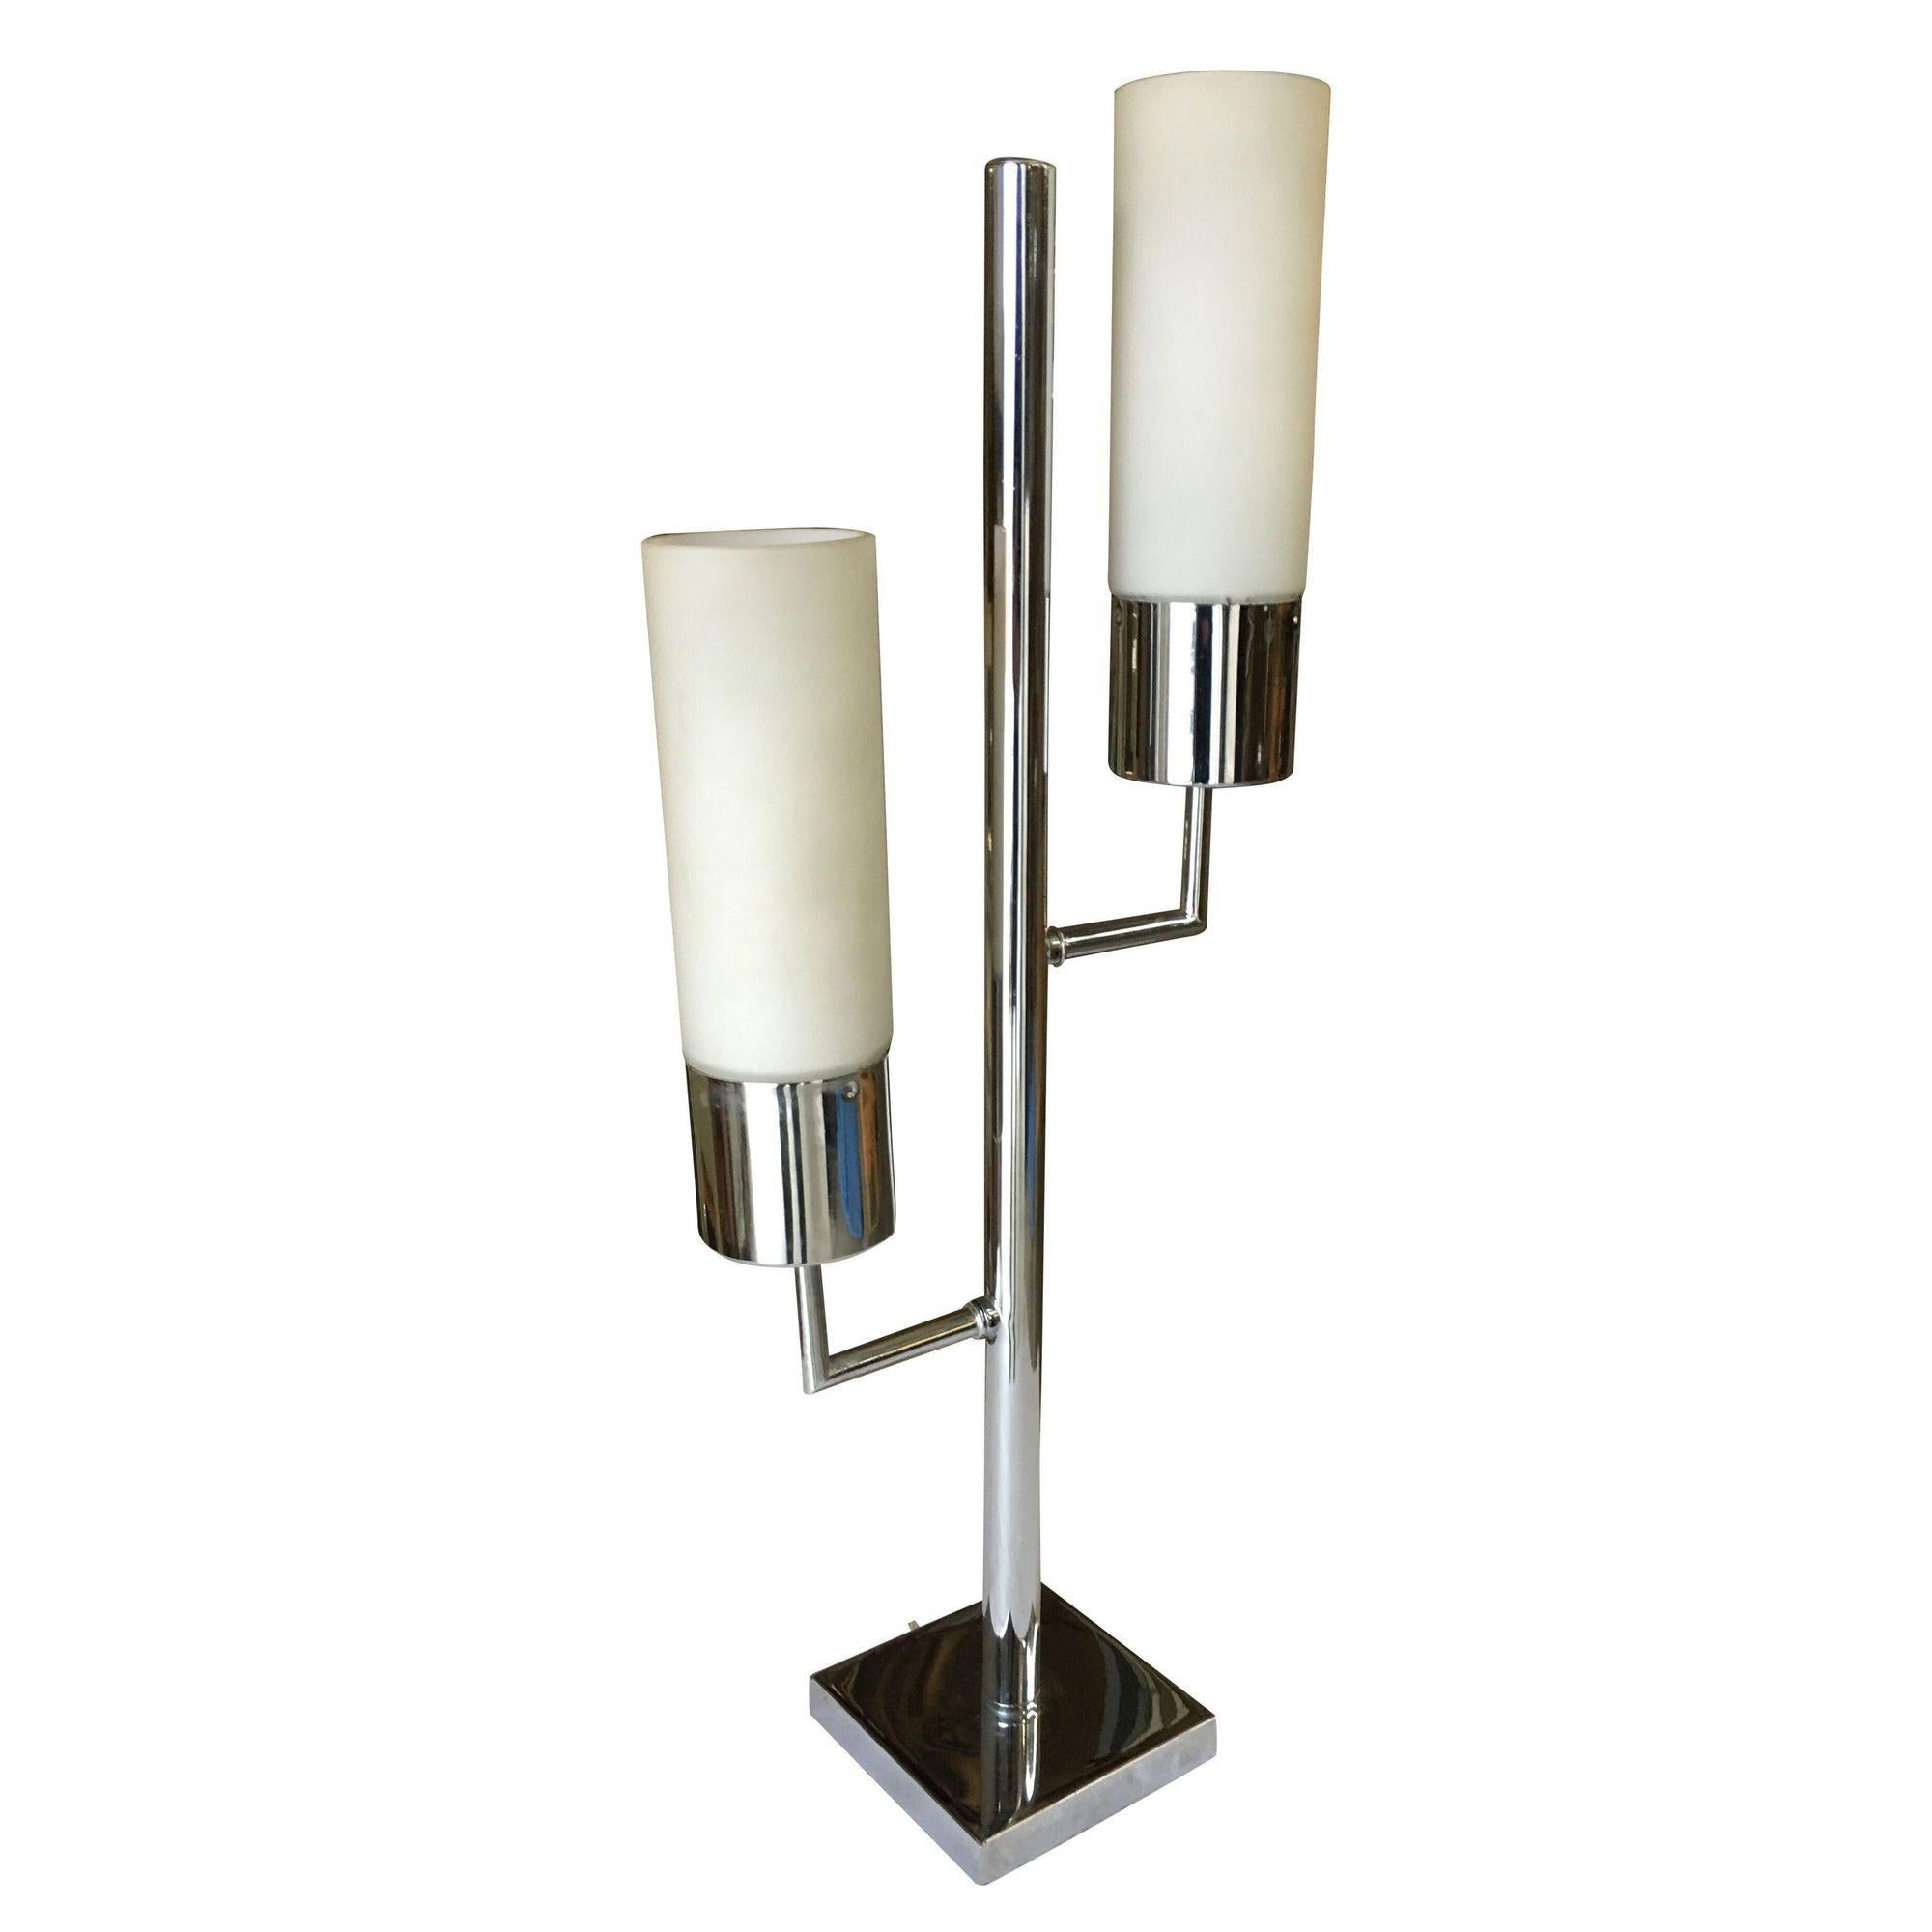 Modernist, midcentury inspired twin cylinder lamp featuring a chrome base and body featuring two 2 lights each with a frosted glass cylinder shade.